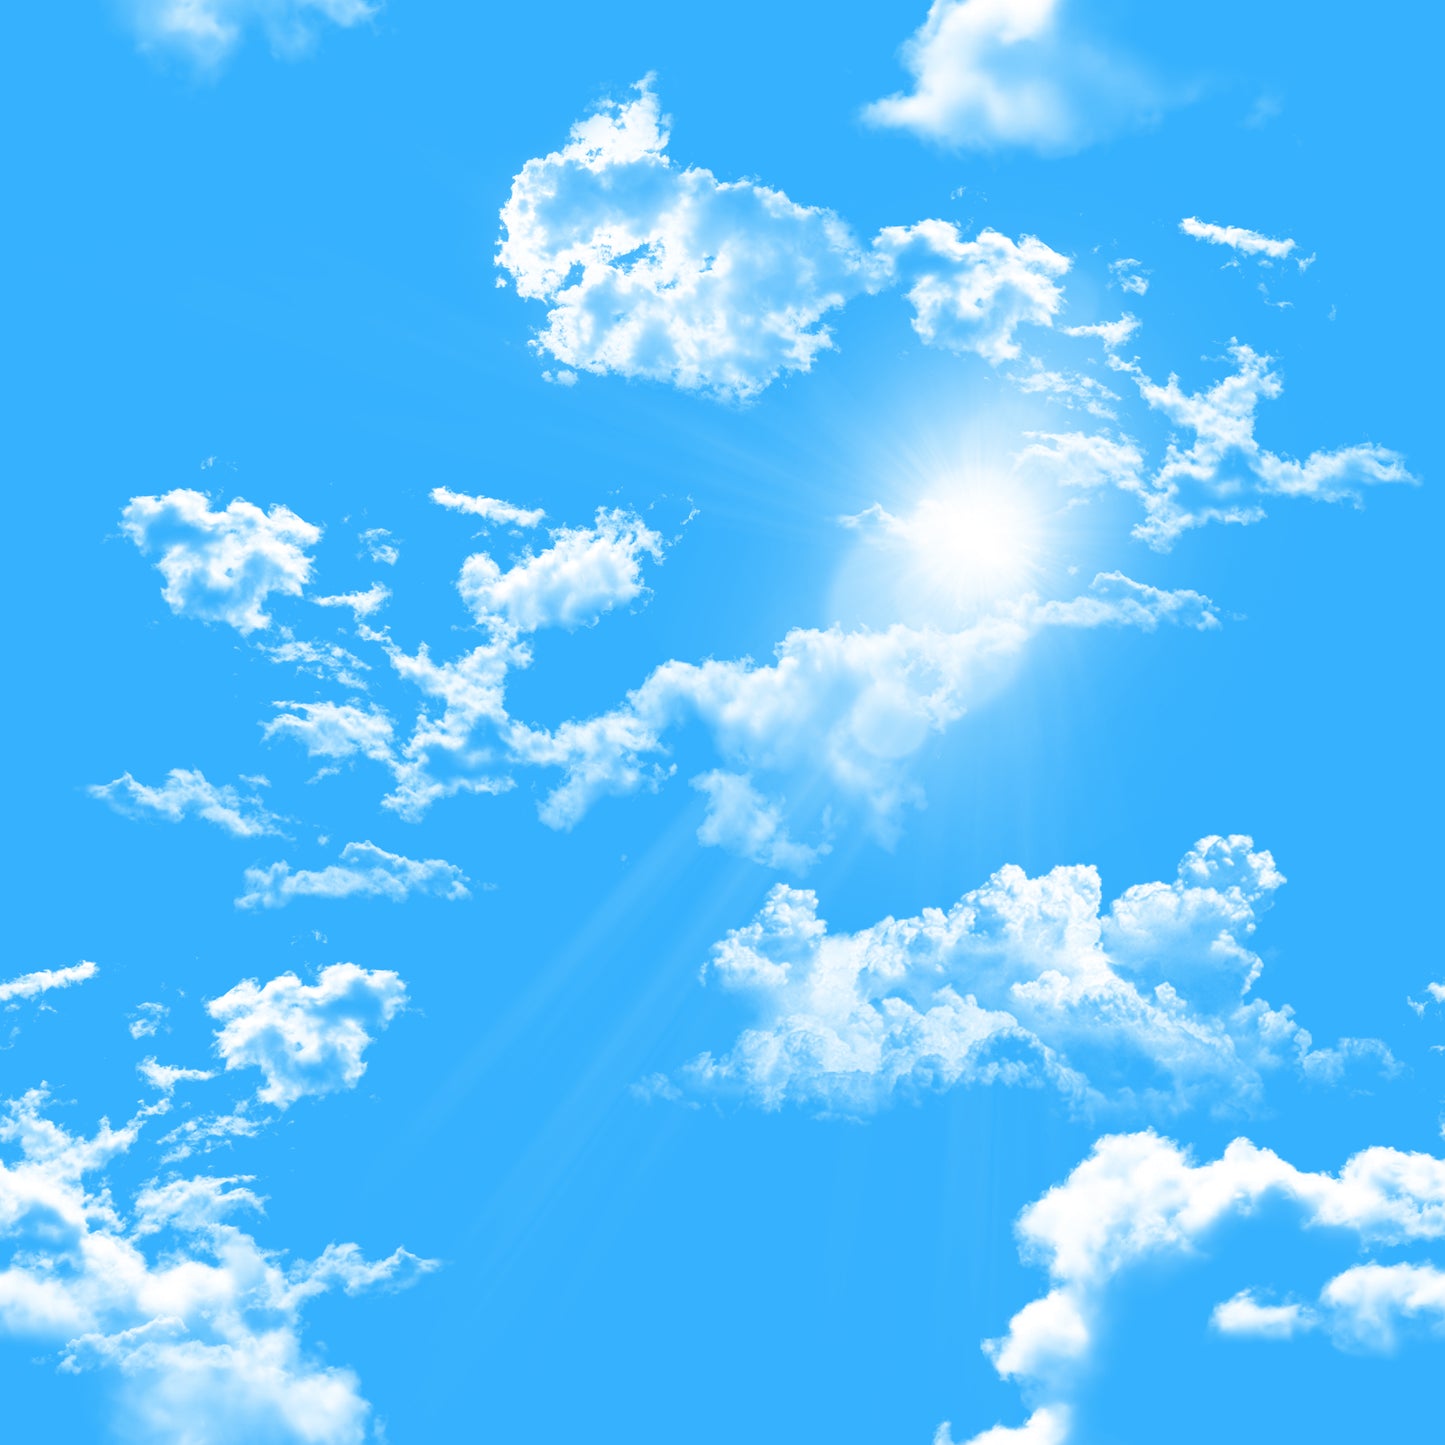 Summer Skies - Blue Sky and Clouds 006